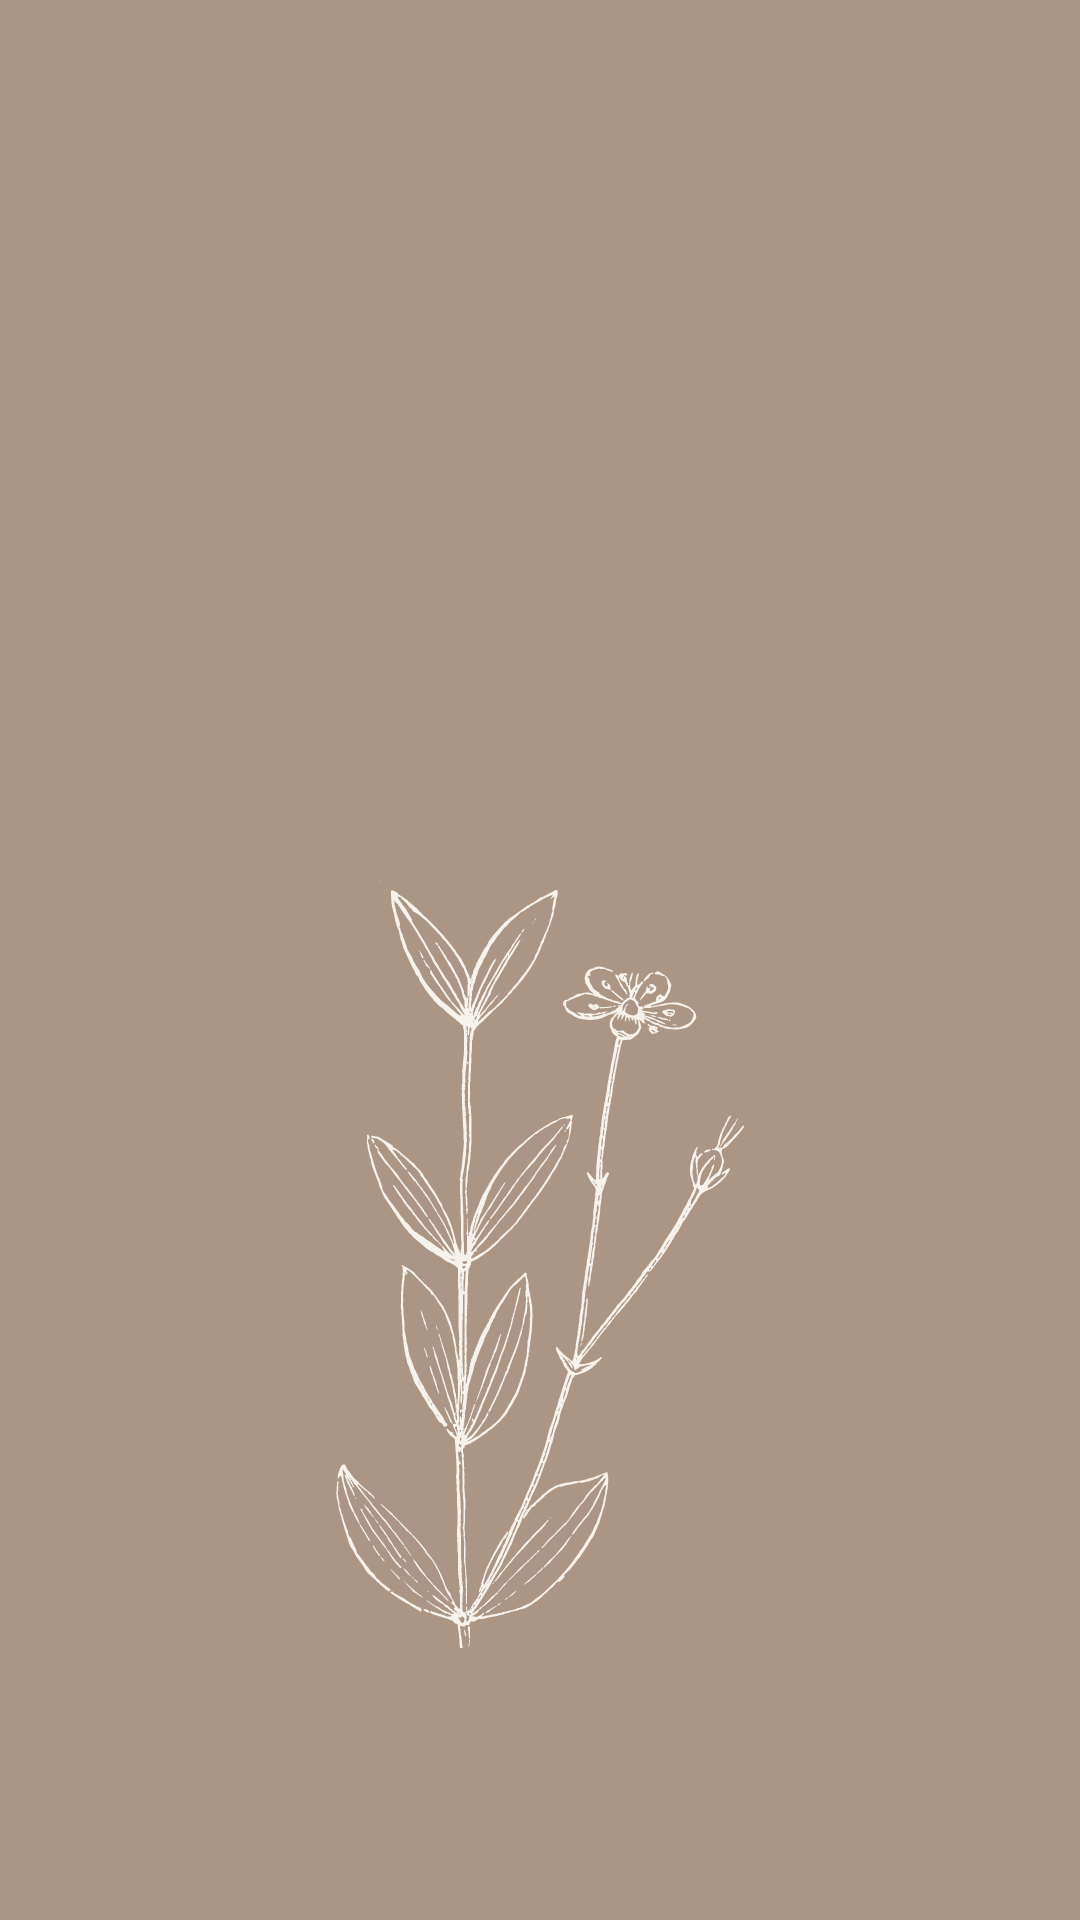 A drawing of some leaves on brown paper - Spring, phone, minimalist, bee, beautiful